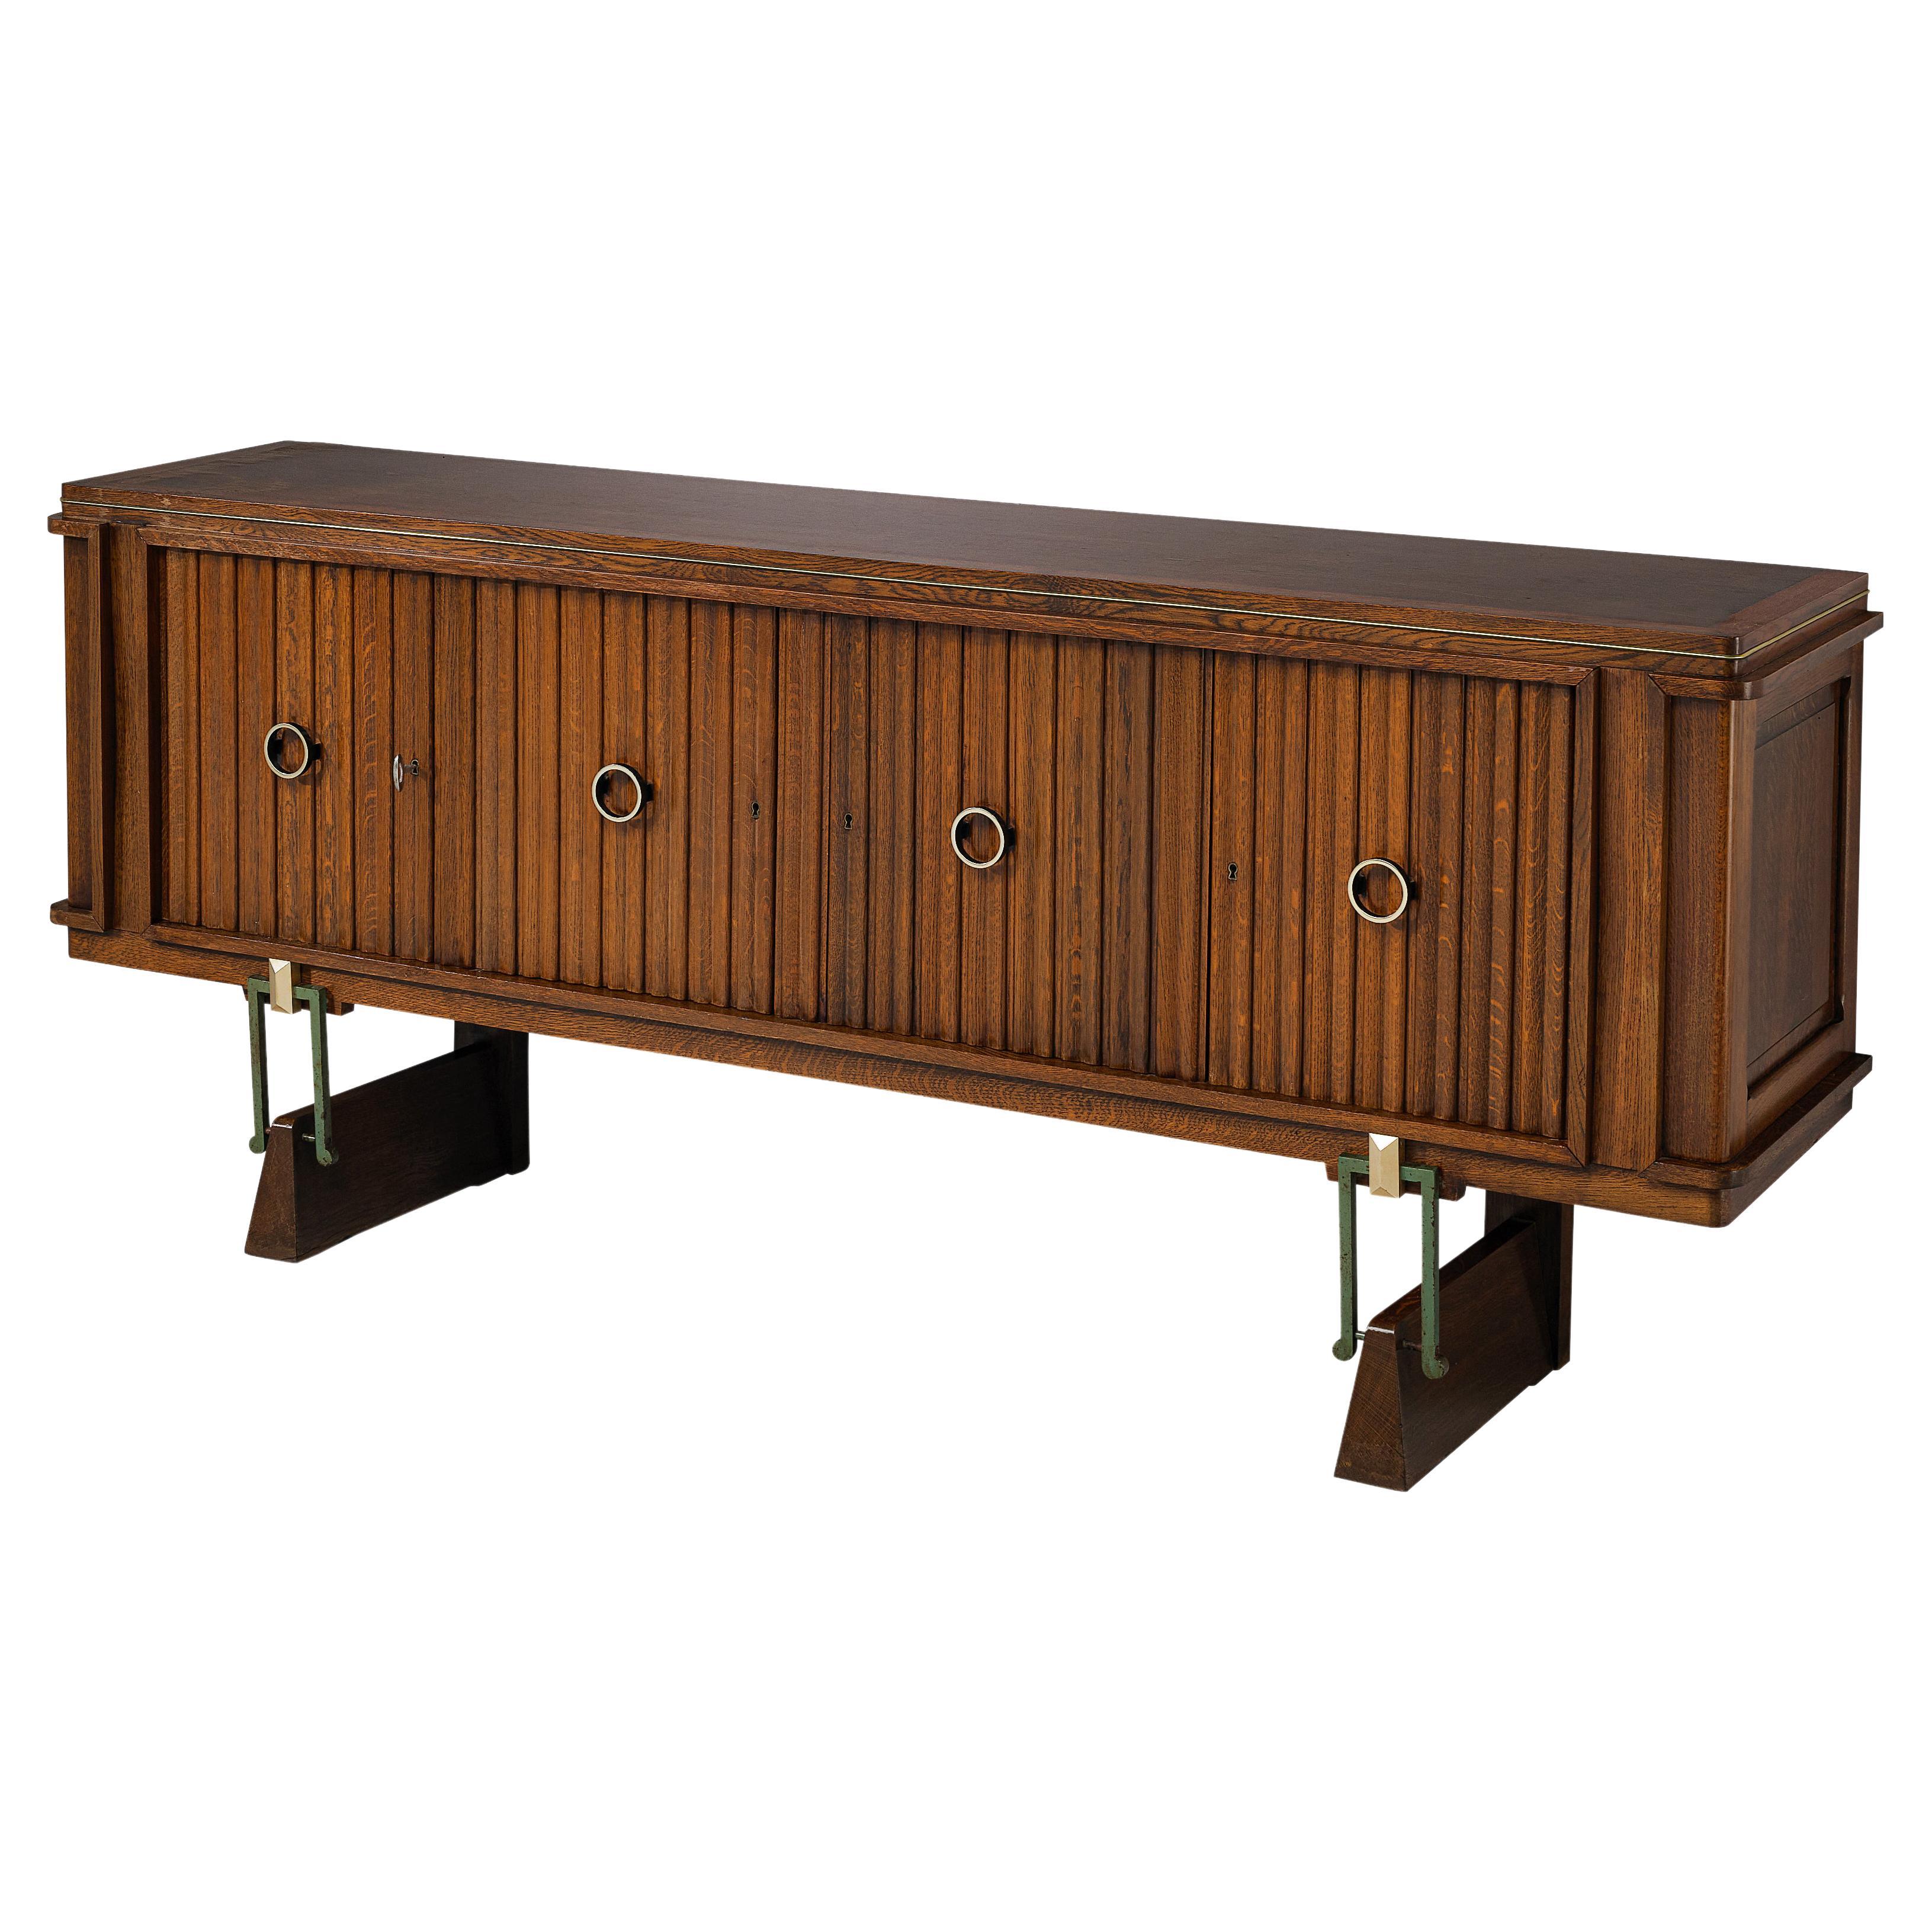 French Late Art Deco Sideboard in Solid Oak and Brass Details For Sale